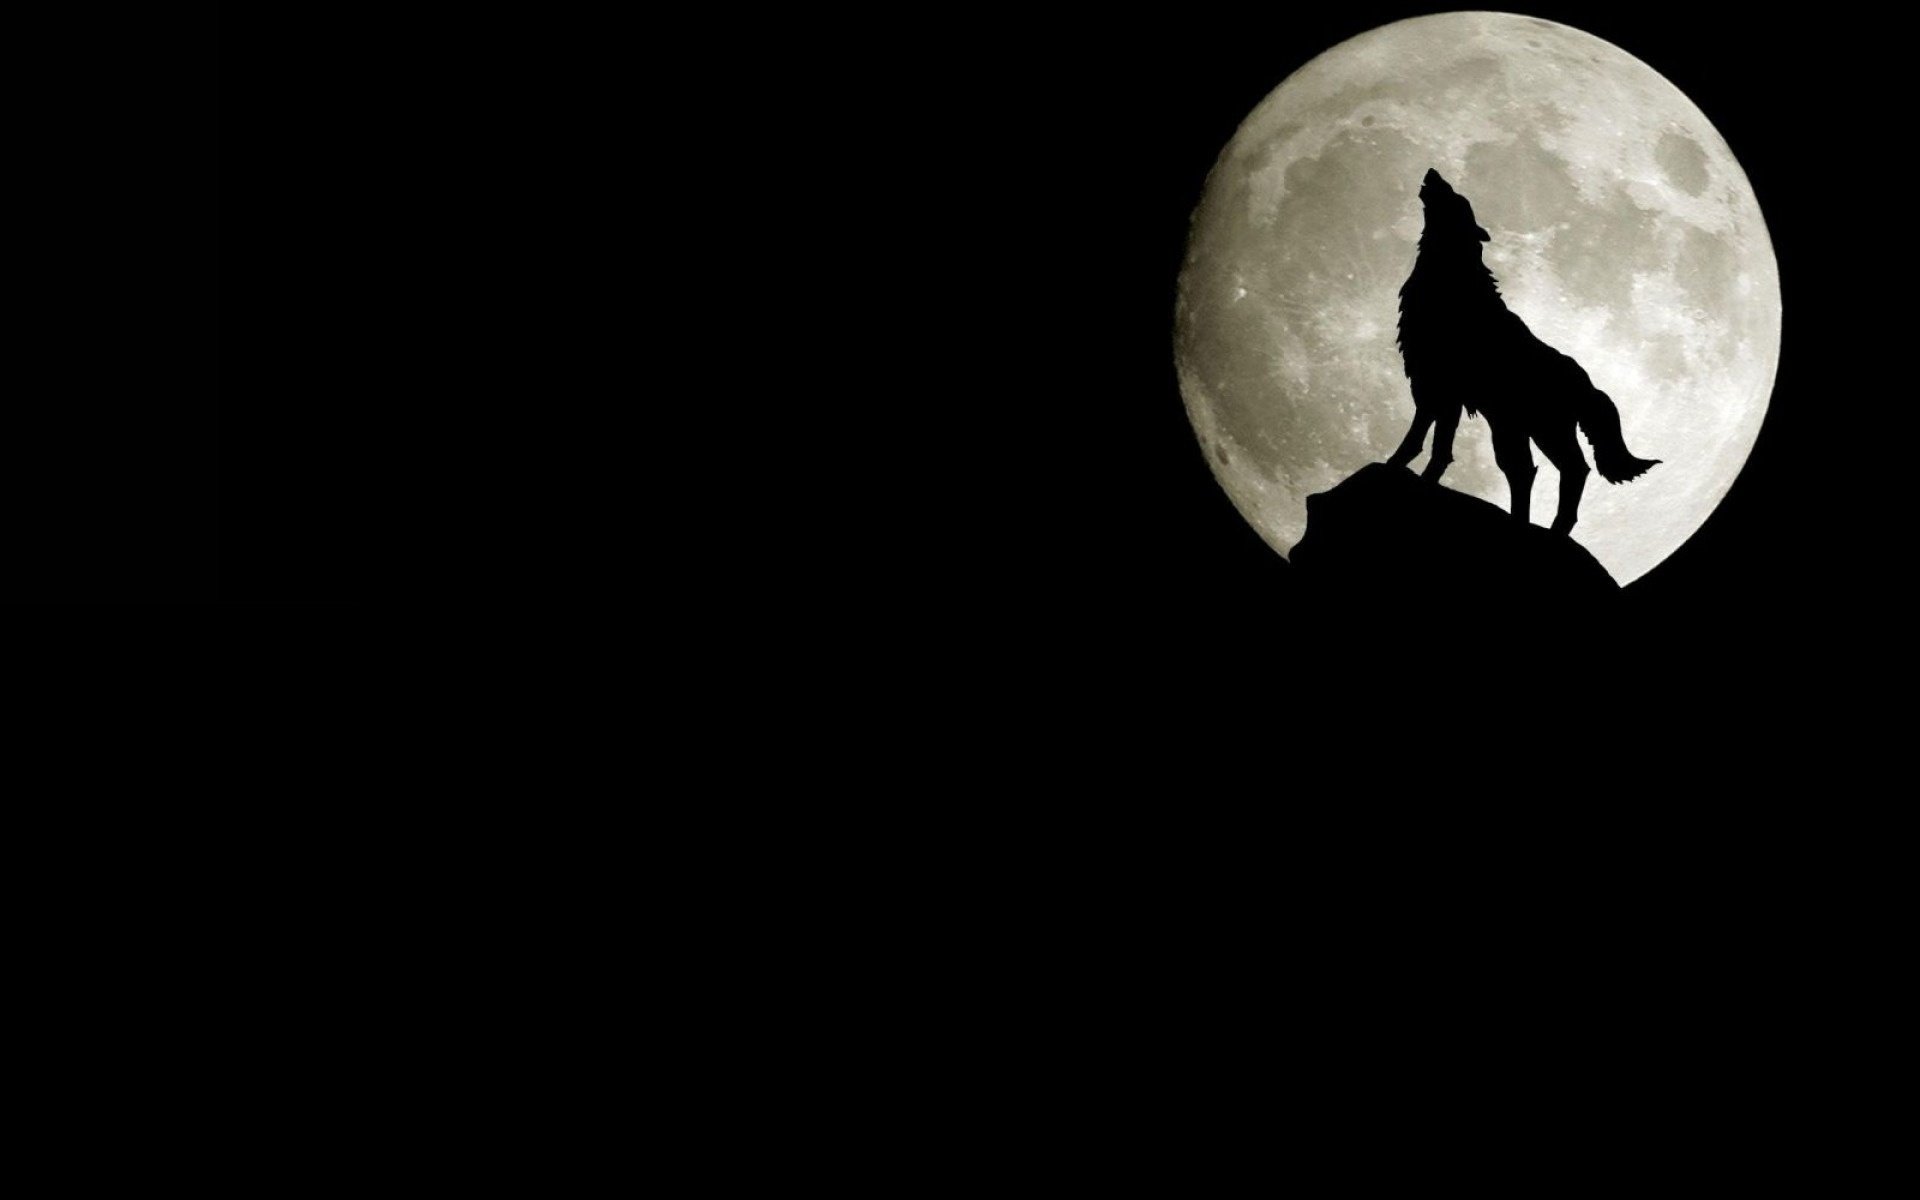 wolf minimalism the moon rock silhouette howling animals easy the dark background